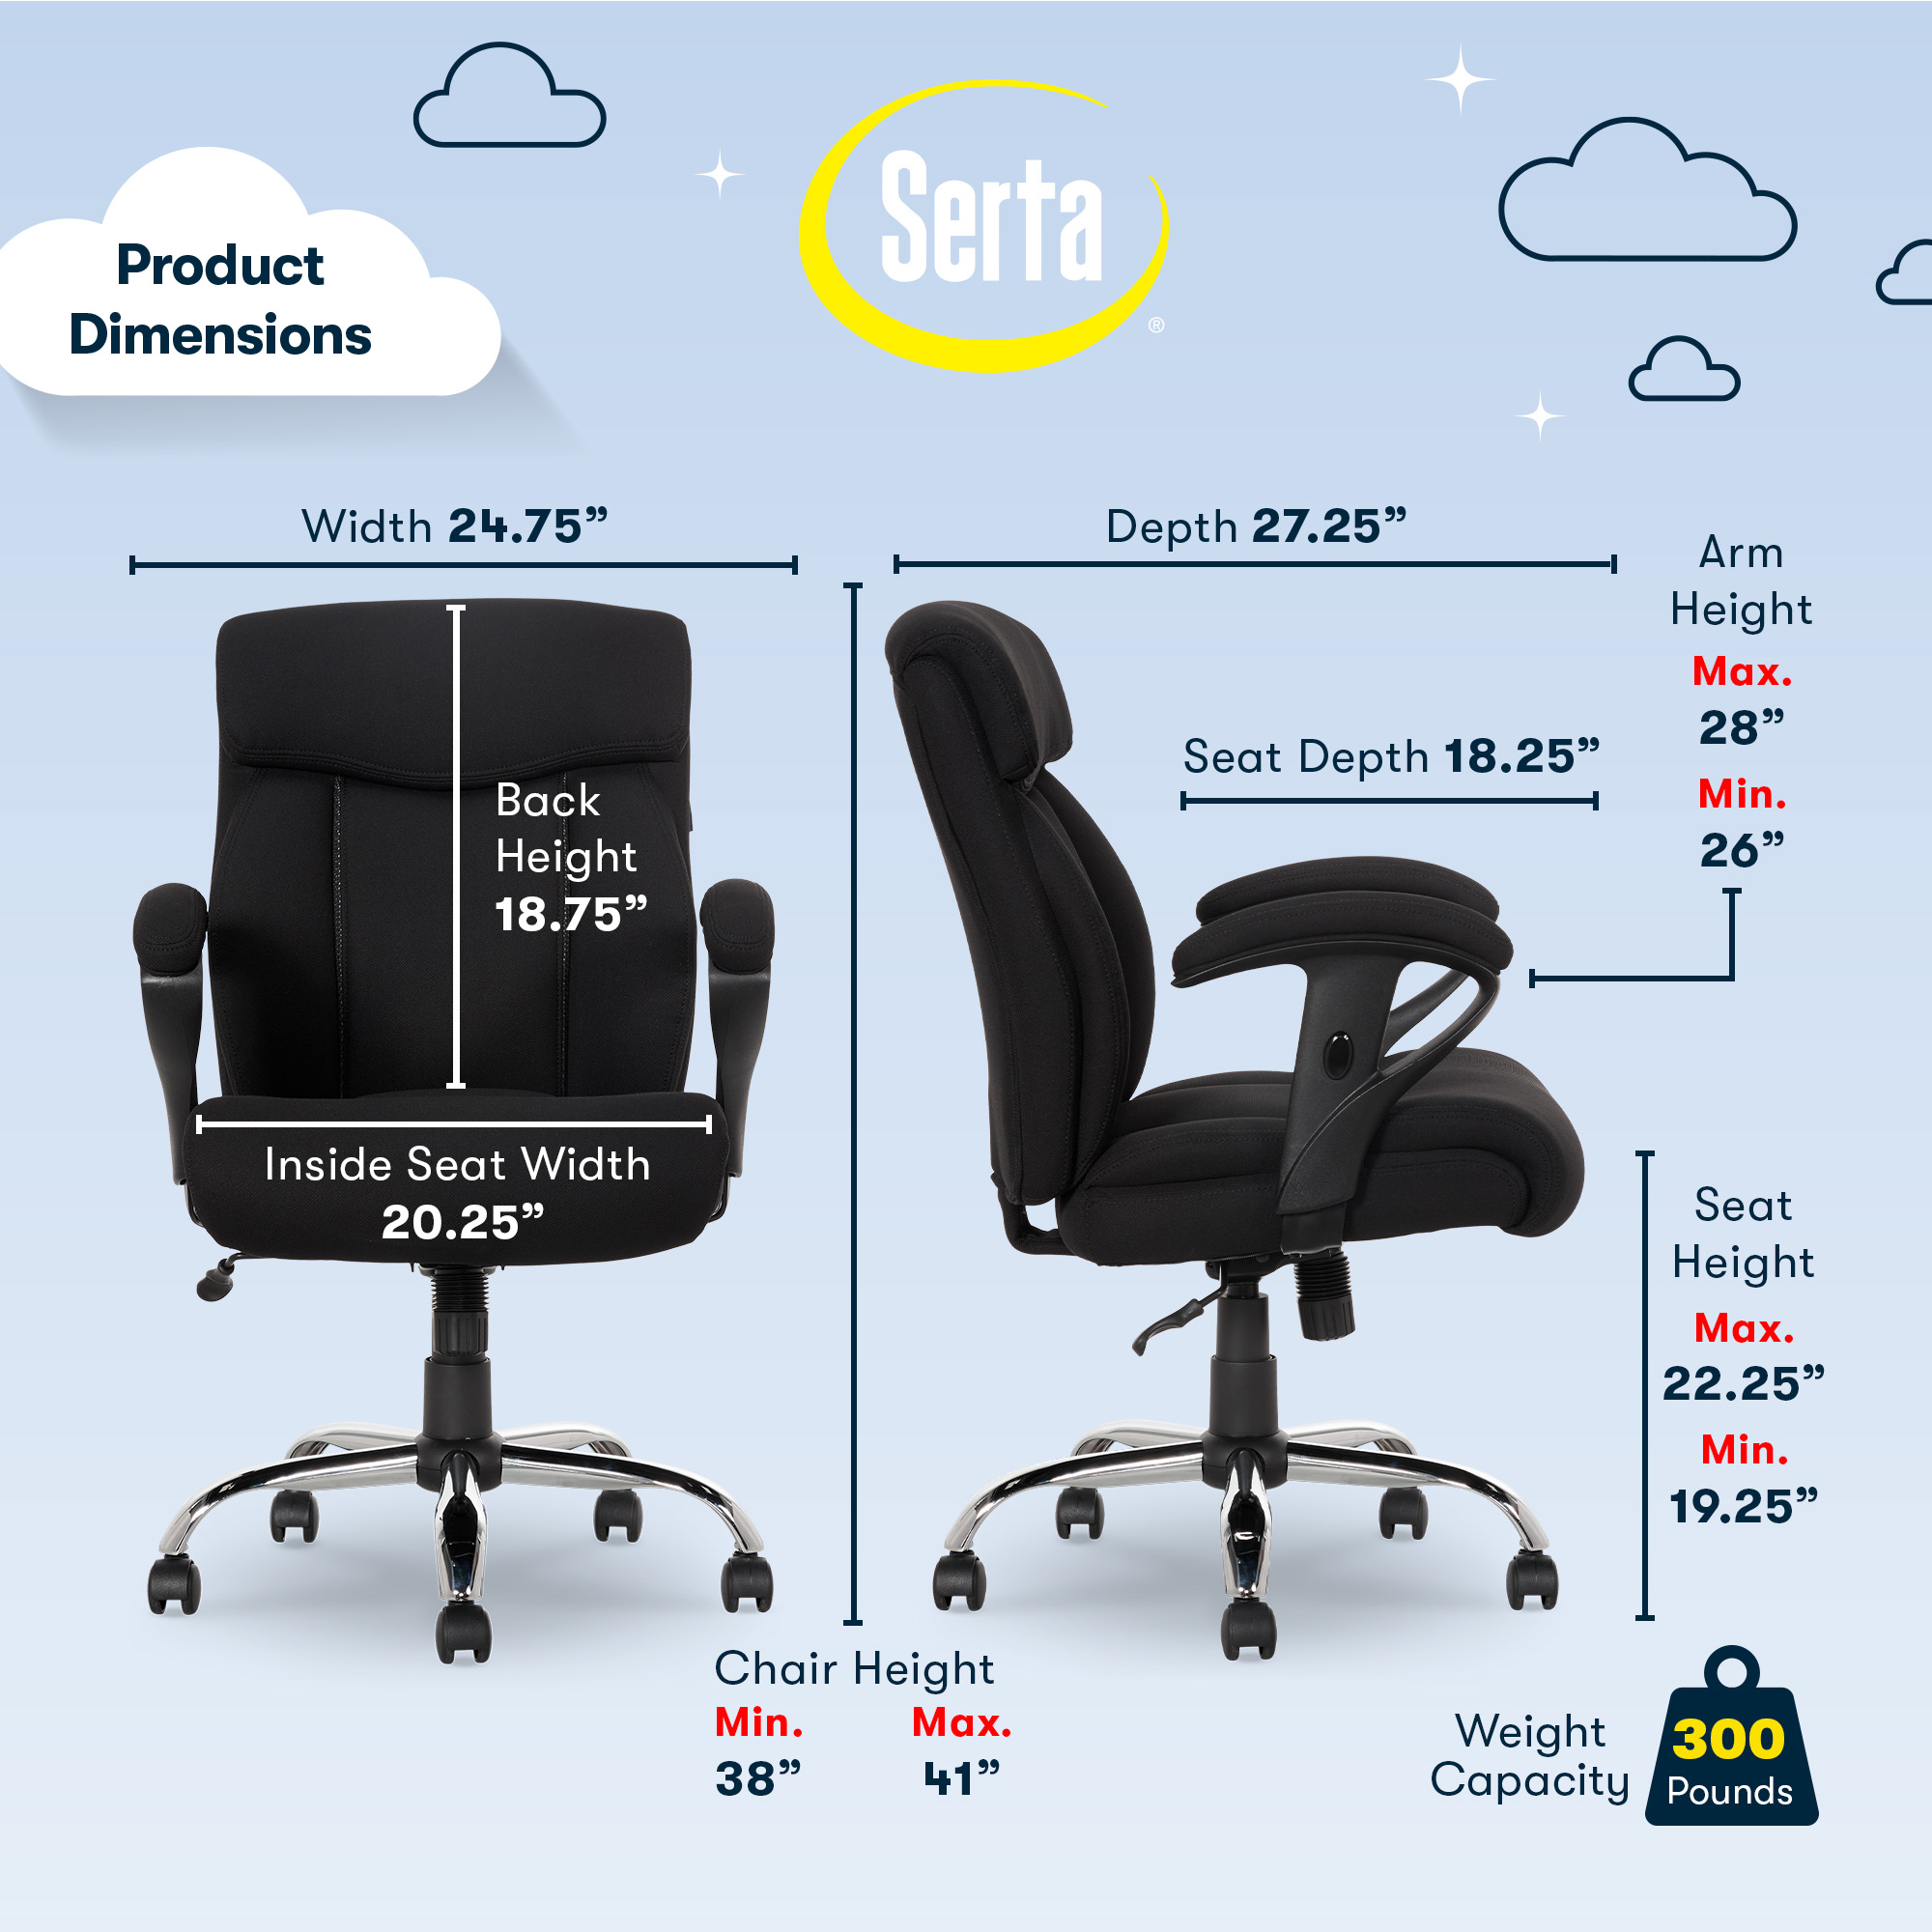 Serta Big & Tall Fabric Manager Office Chair, Supports up to 300 lbs, Black - image 3 of 15